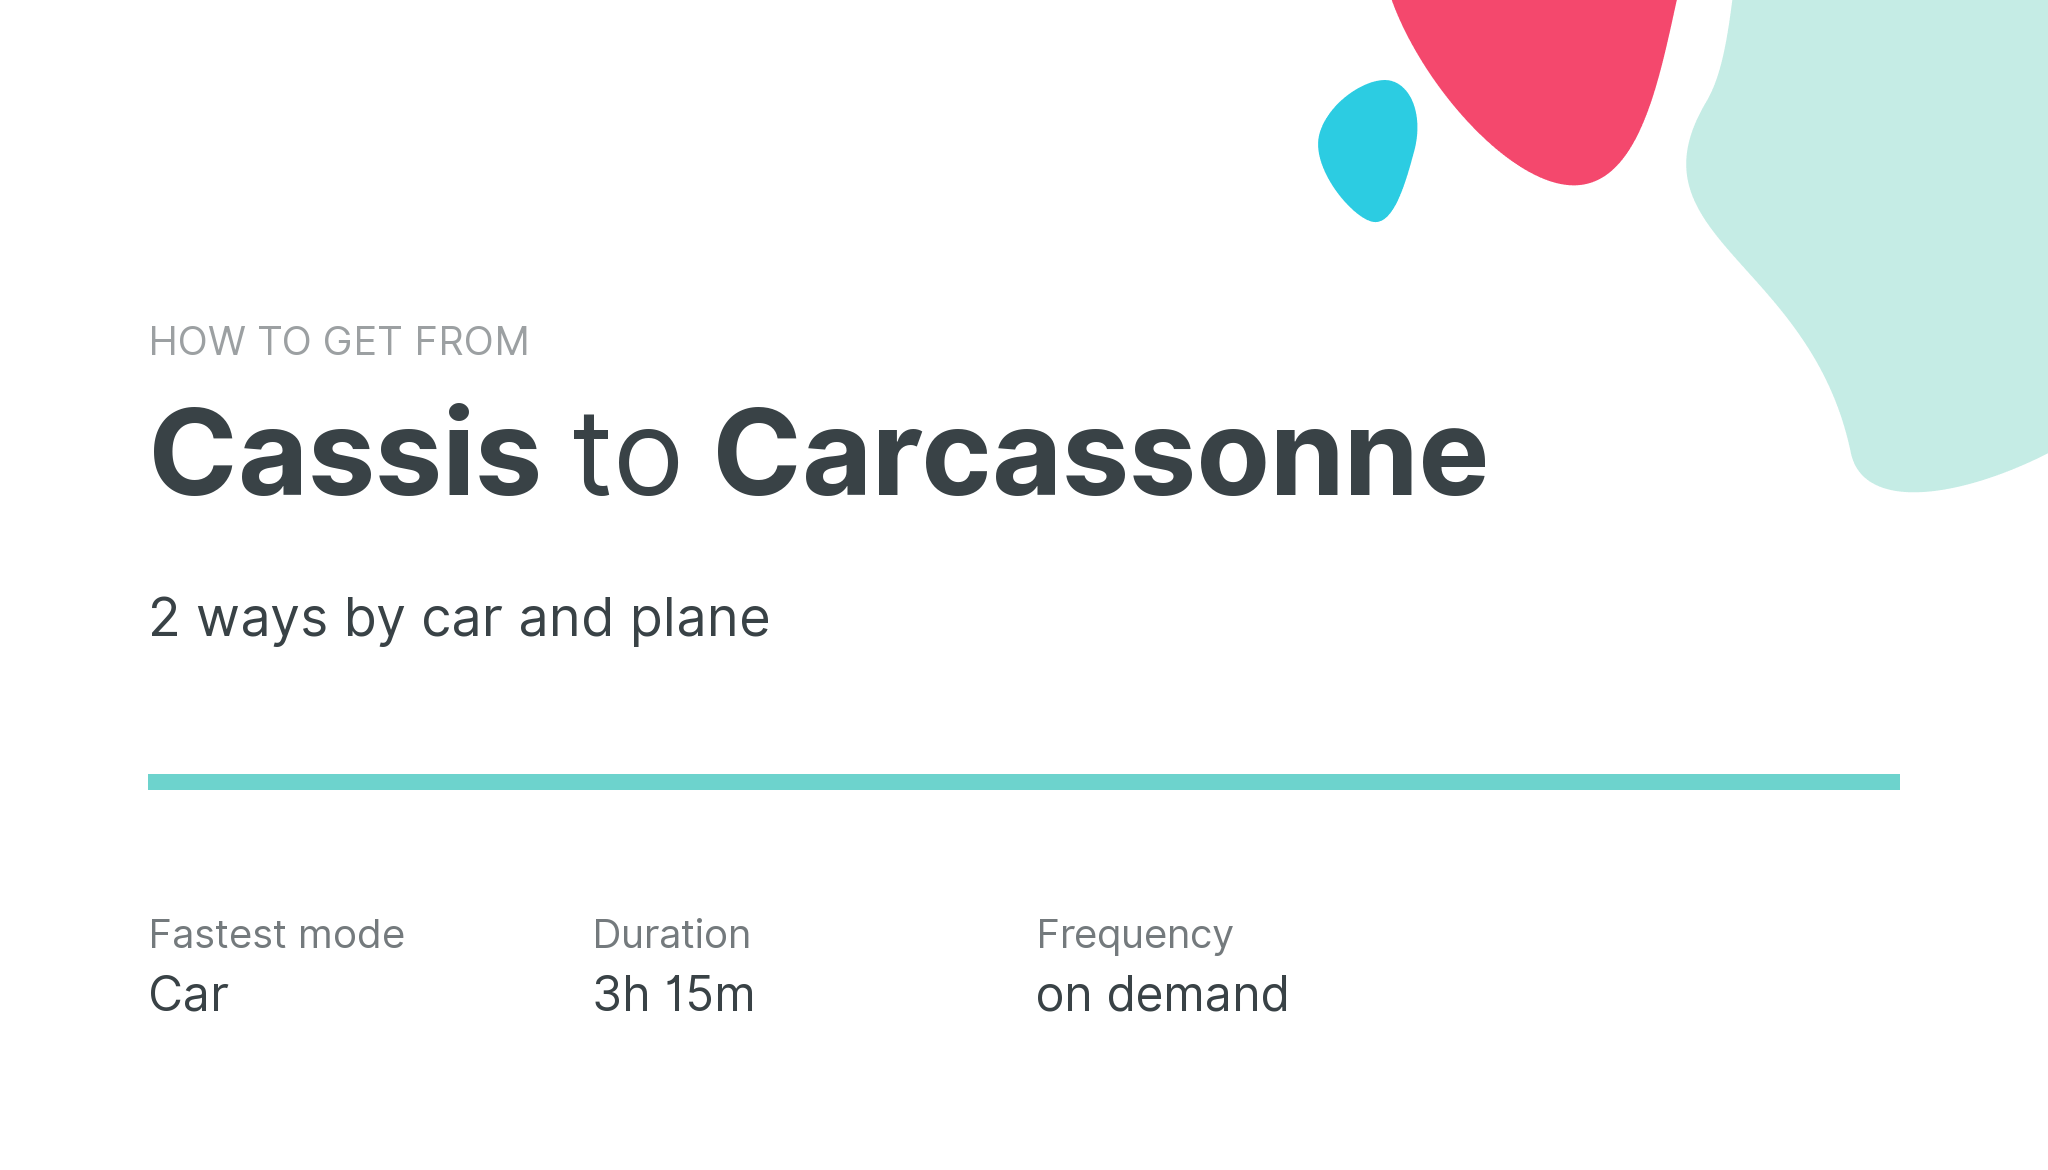 How do I get from Cassis to Carcassonne